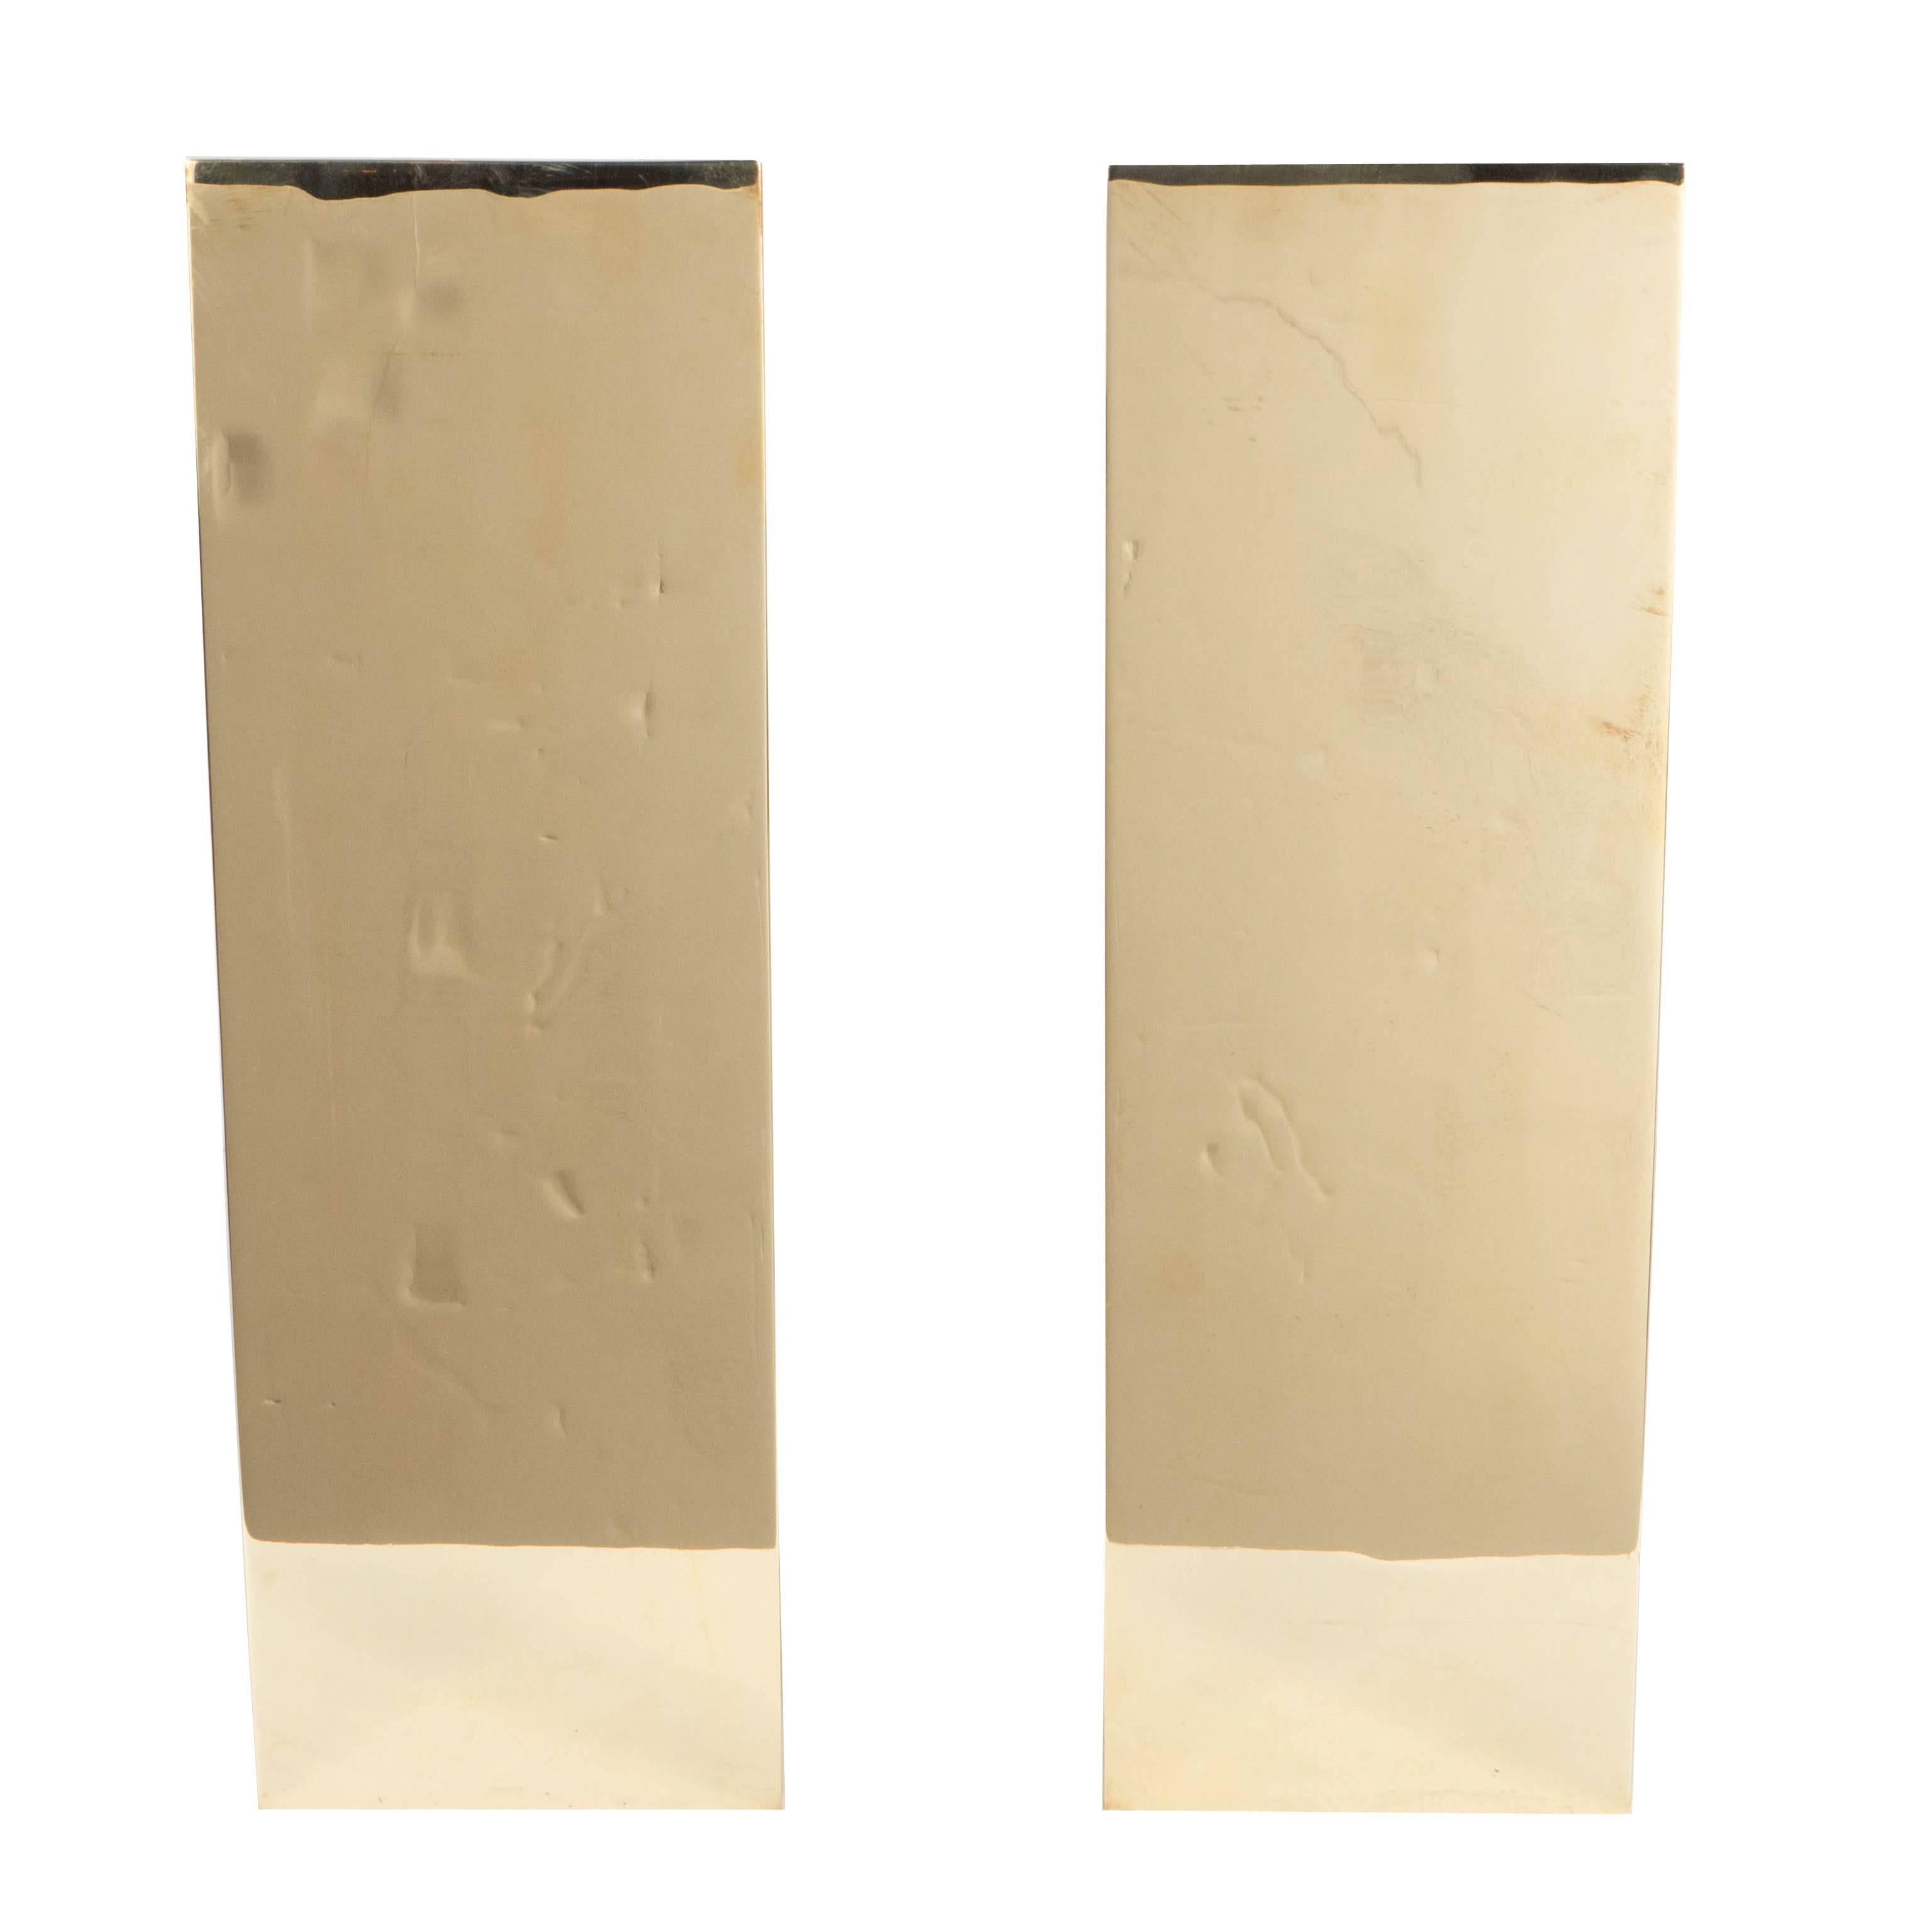 This ultra chic pair of custom andirons feature a minimalistic vertical rectangular front panel displayed in polished brass. They are fully customizable in terms of the dimensions and finish options include polished, brushed or antiqued nickel or